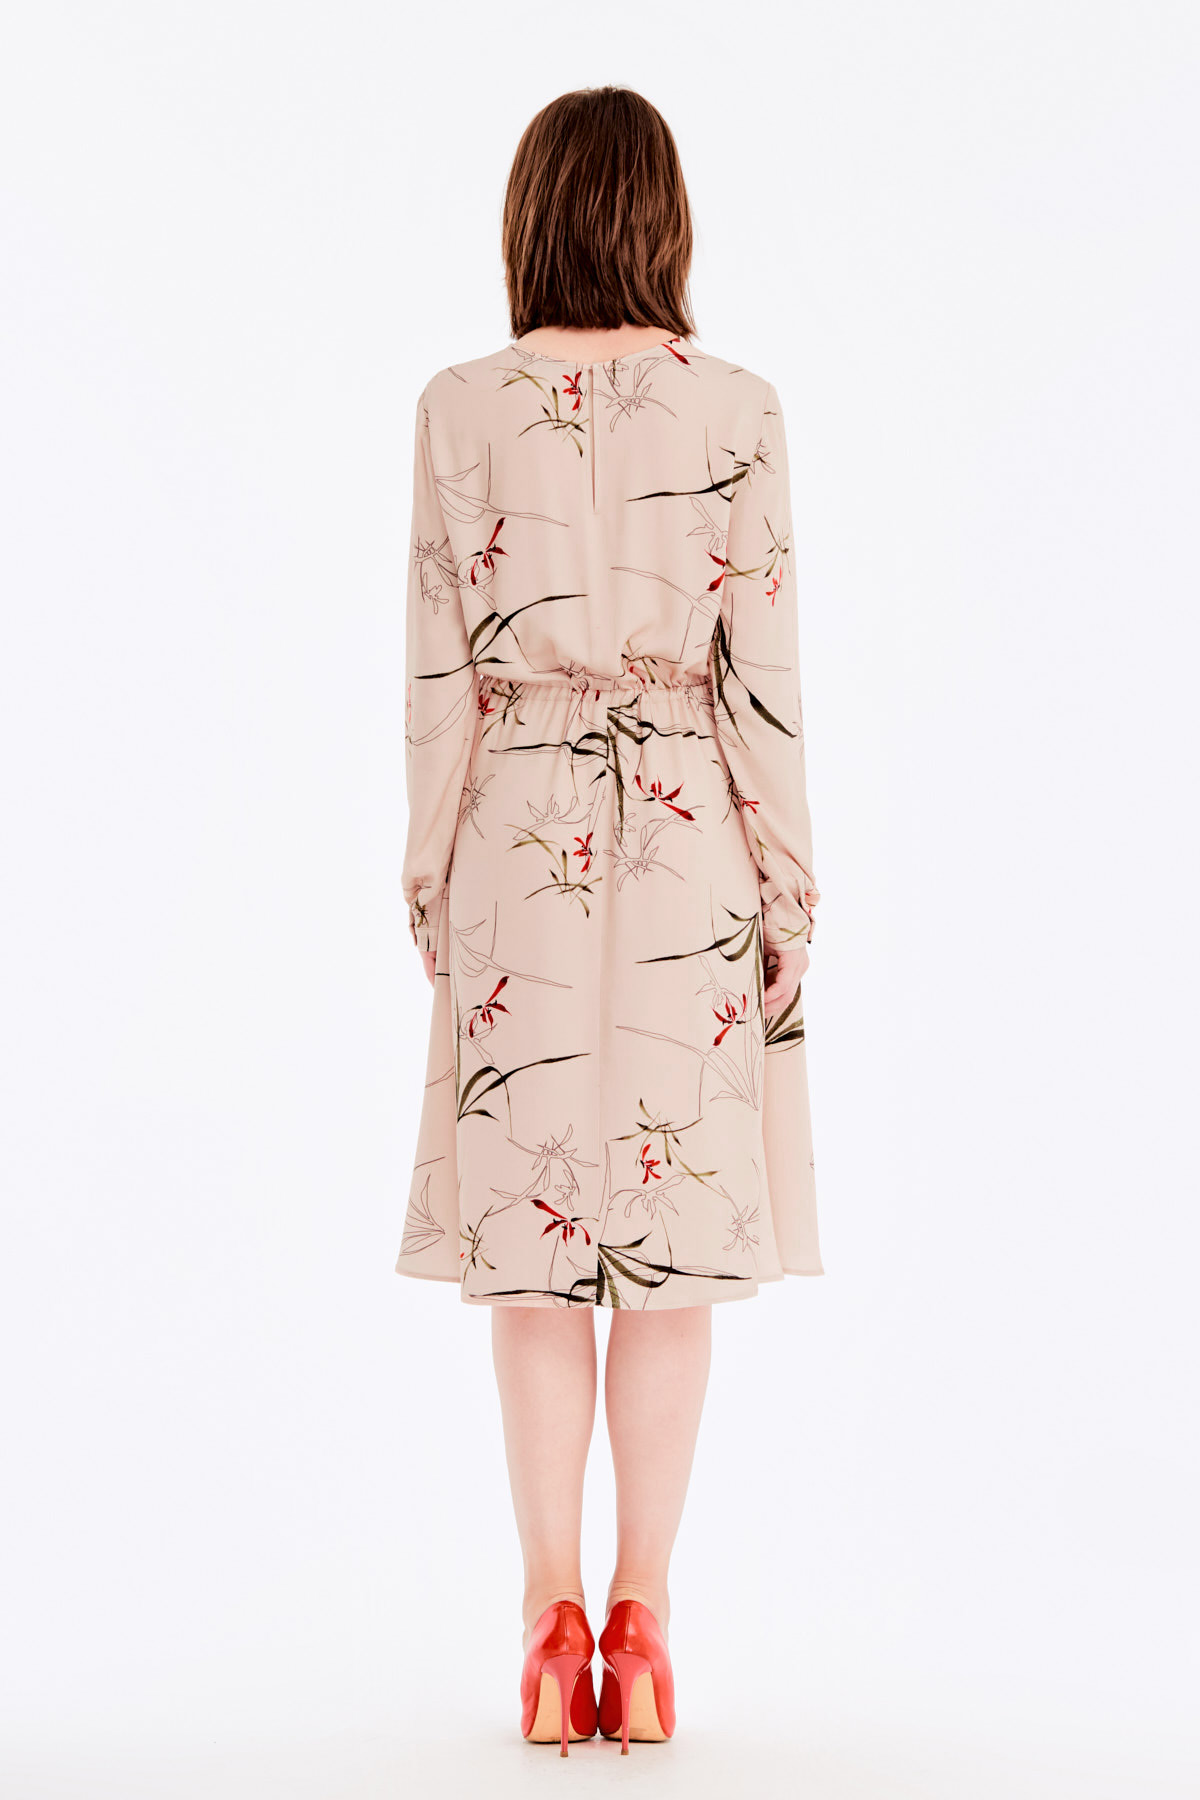 Beige dress with a floral print and ties, photo 6